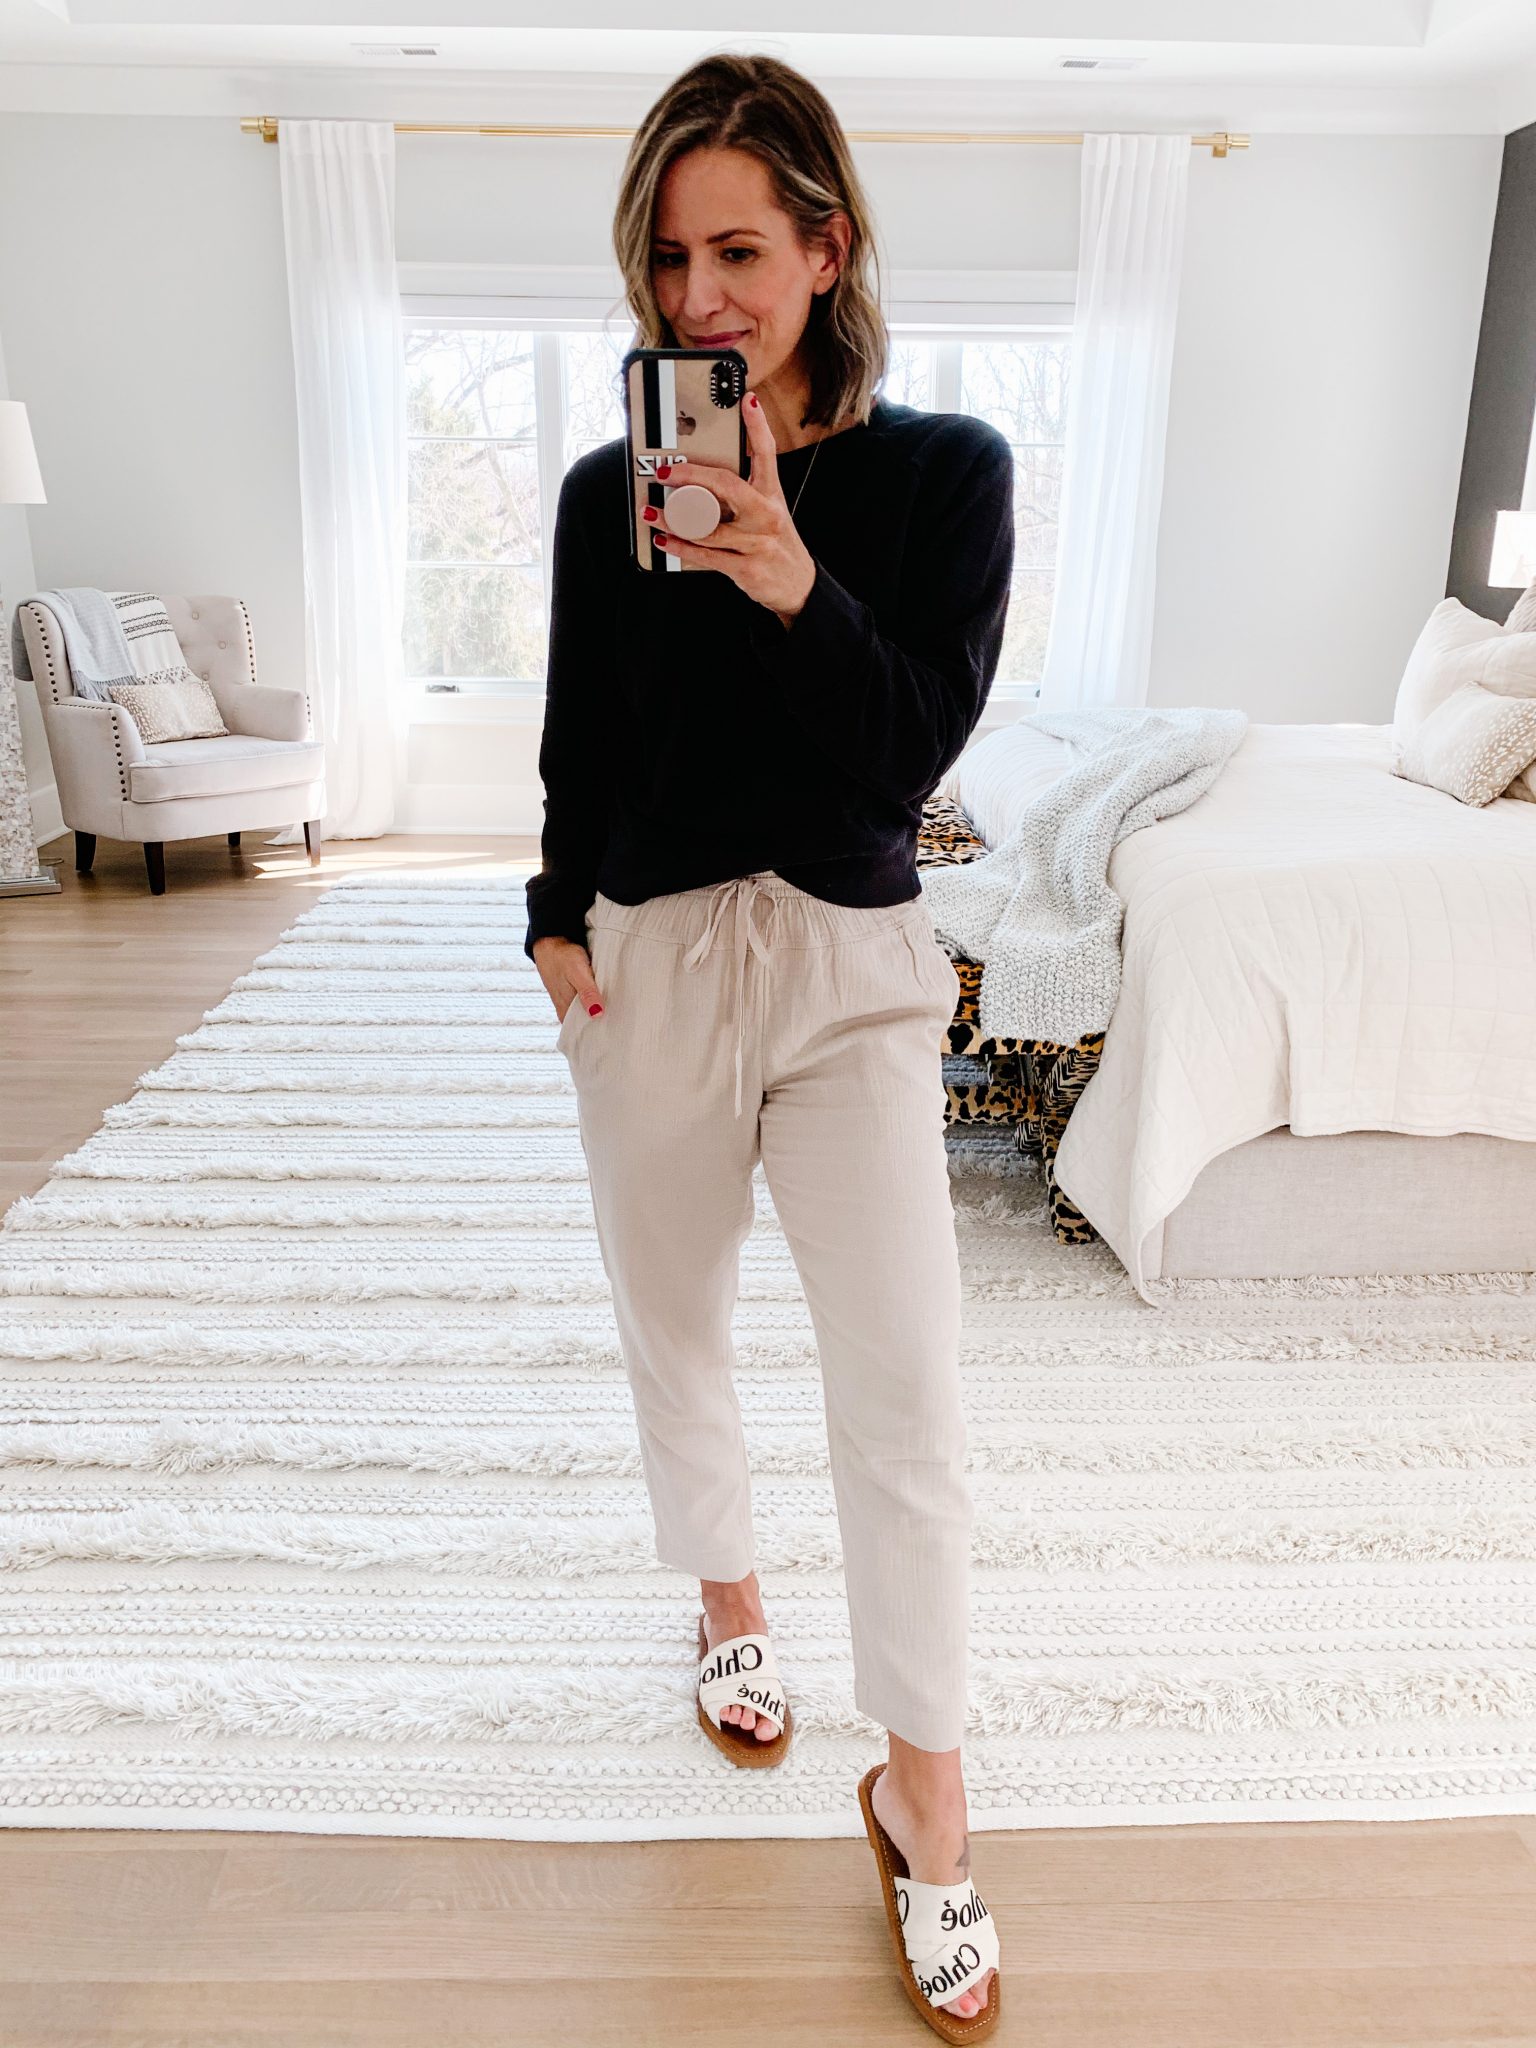 Real #ootd Round Up - My Kind of Sweet